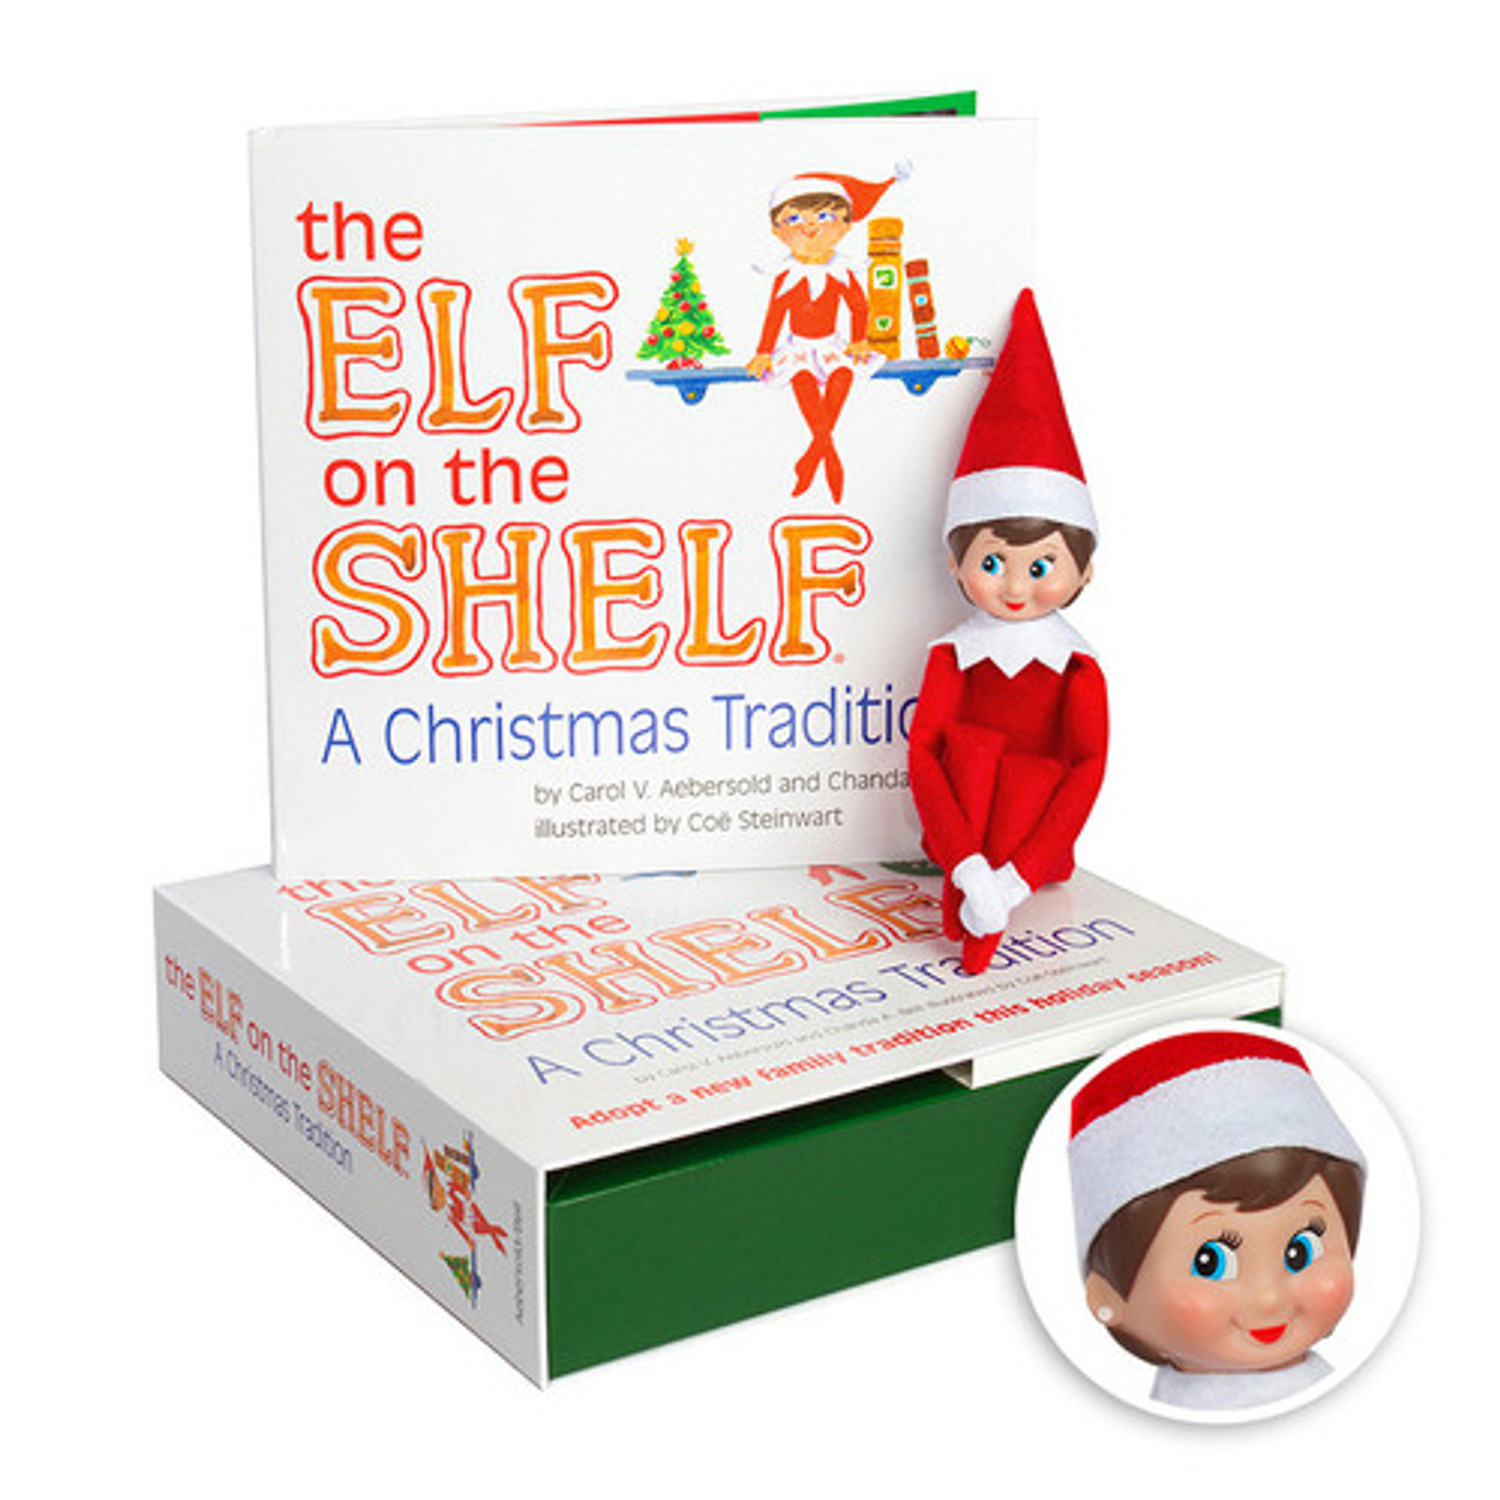 The Elf on the Shelf A Christmas Tradition Box Set includes girl scout elf  w/ light skin tone